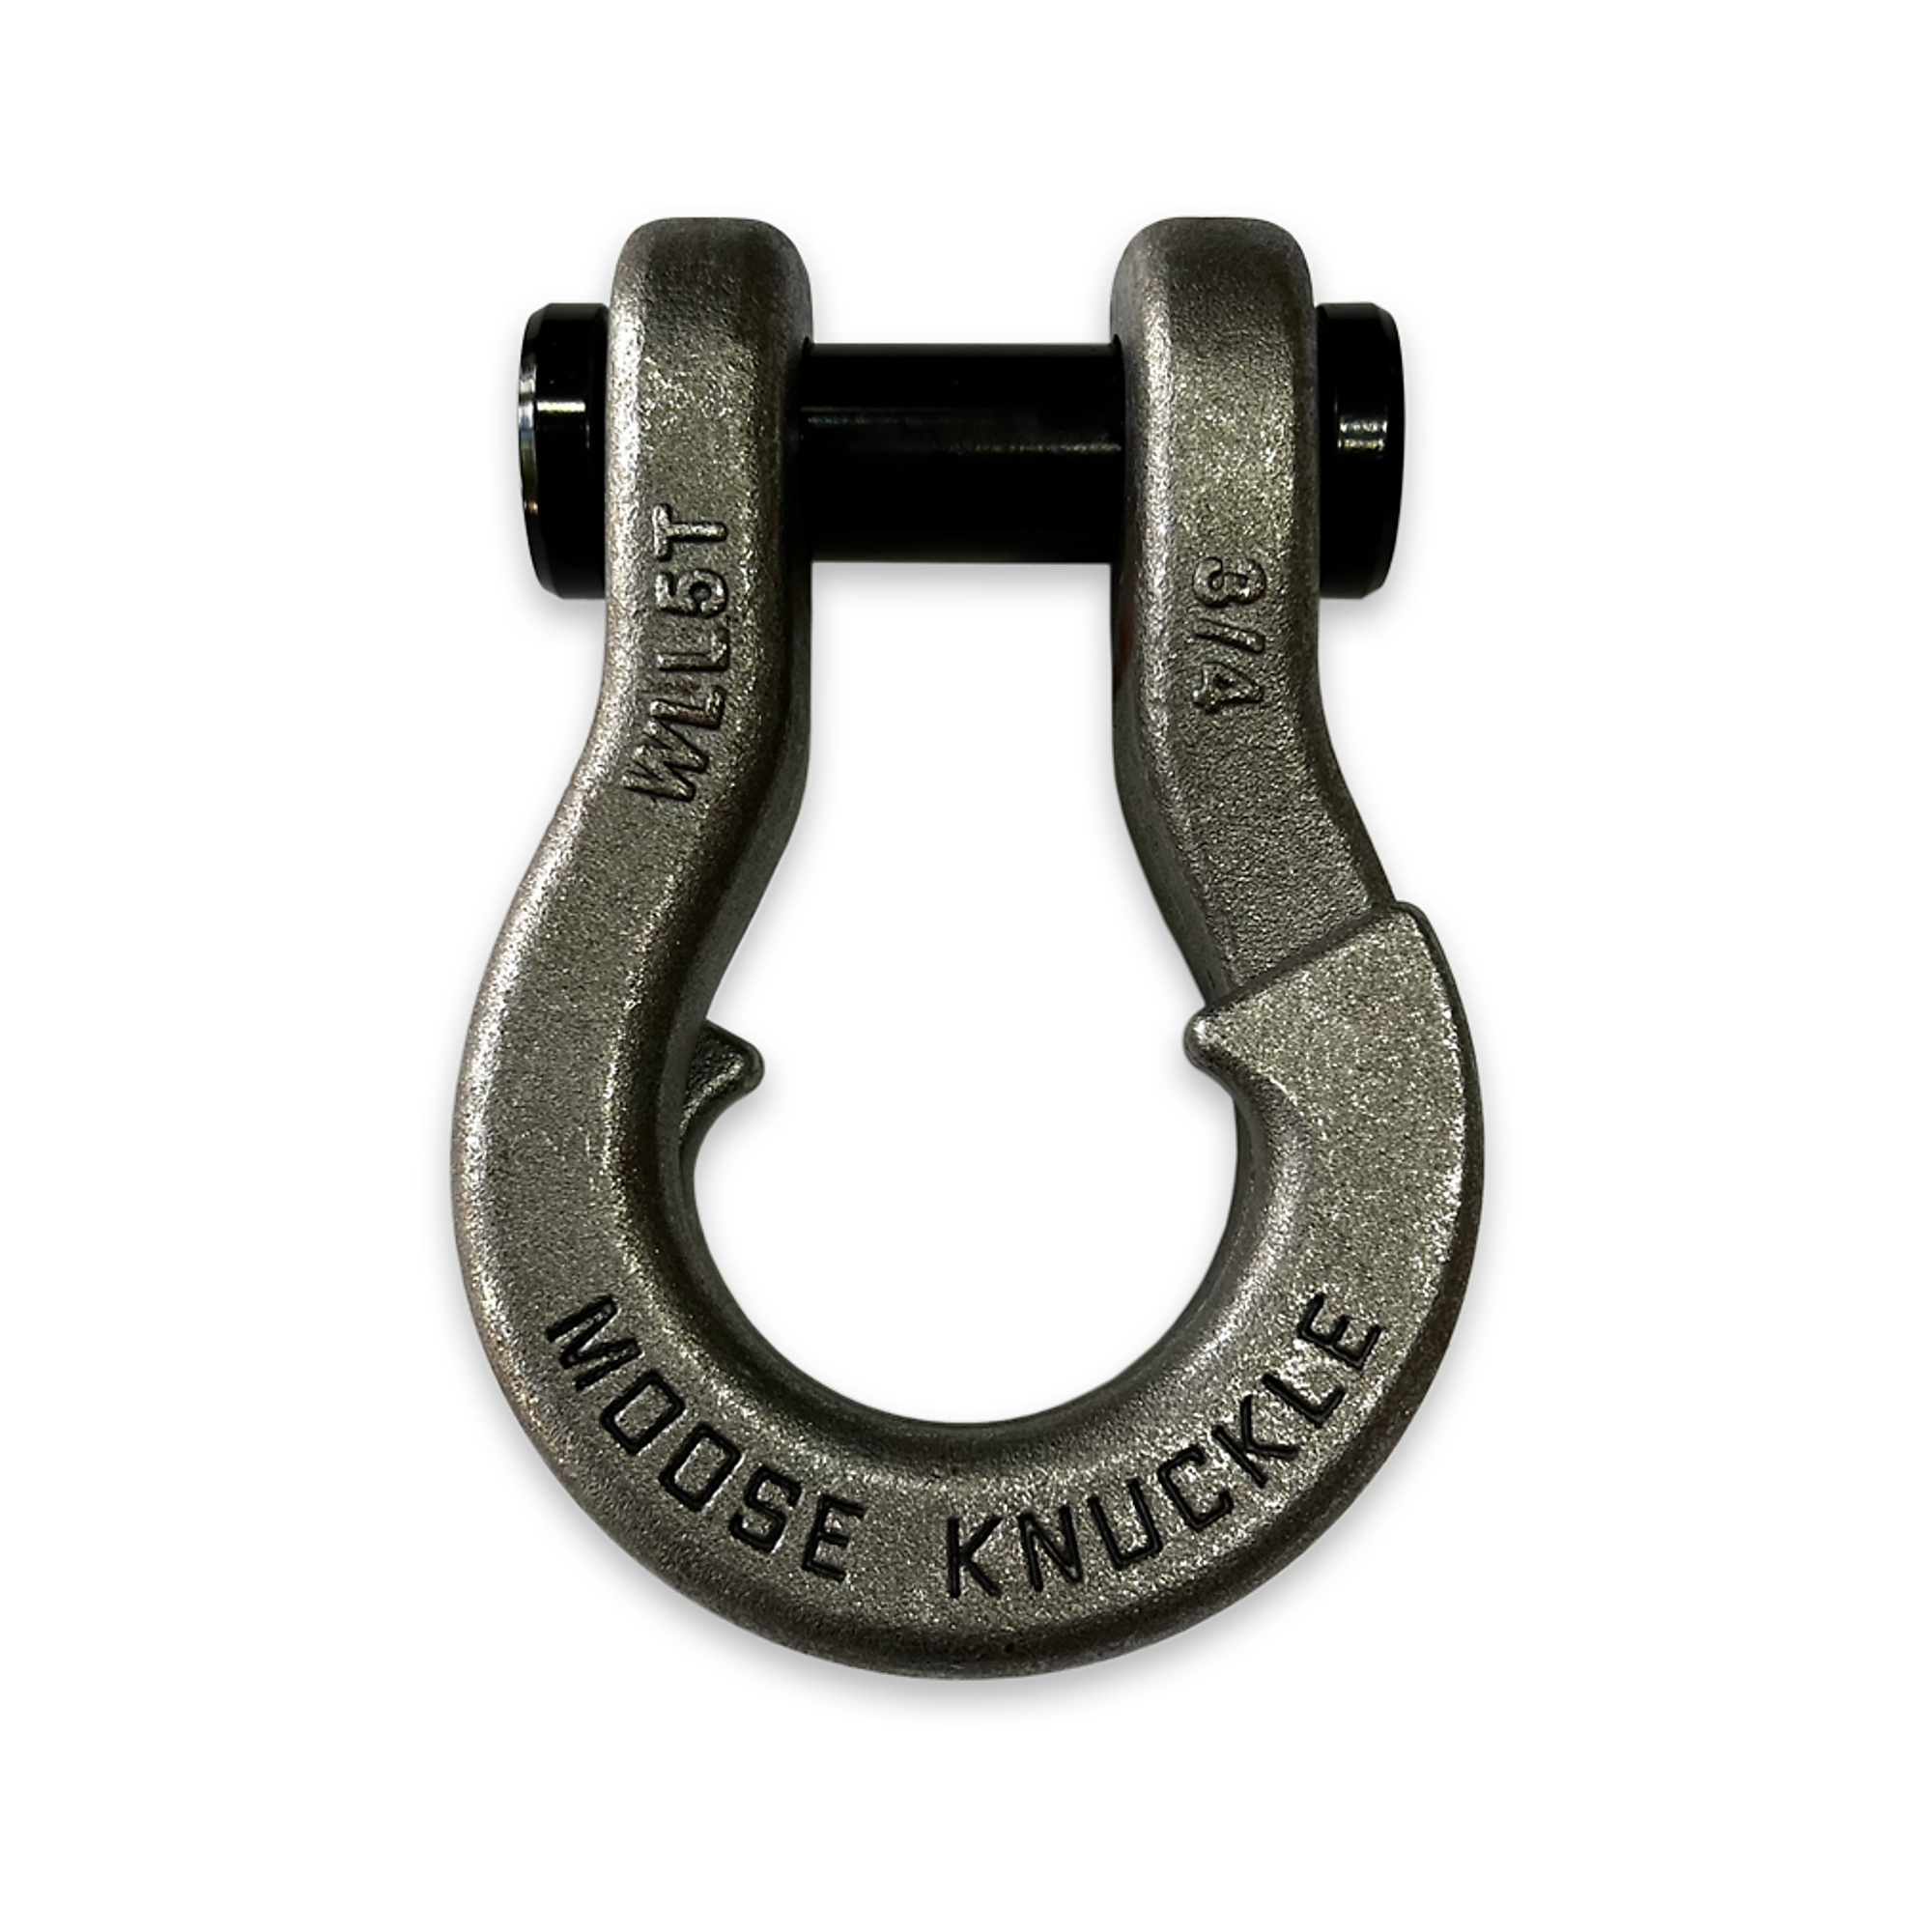 Moose Knuckle Offroad, Raw Dog Uncoated 3/4Inch Recovery Towing Split Shackle, Working Load Limit 10000 lb, Model FN000020-013